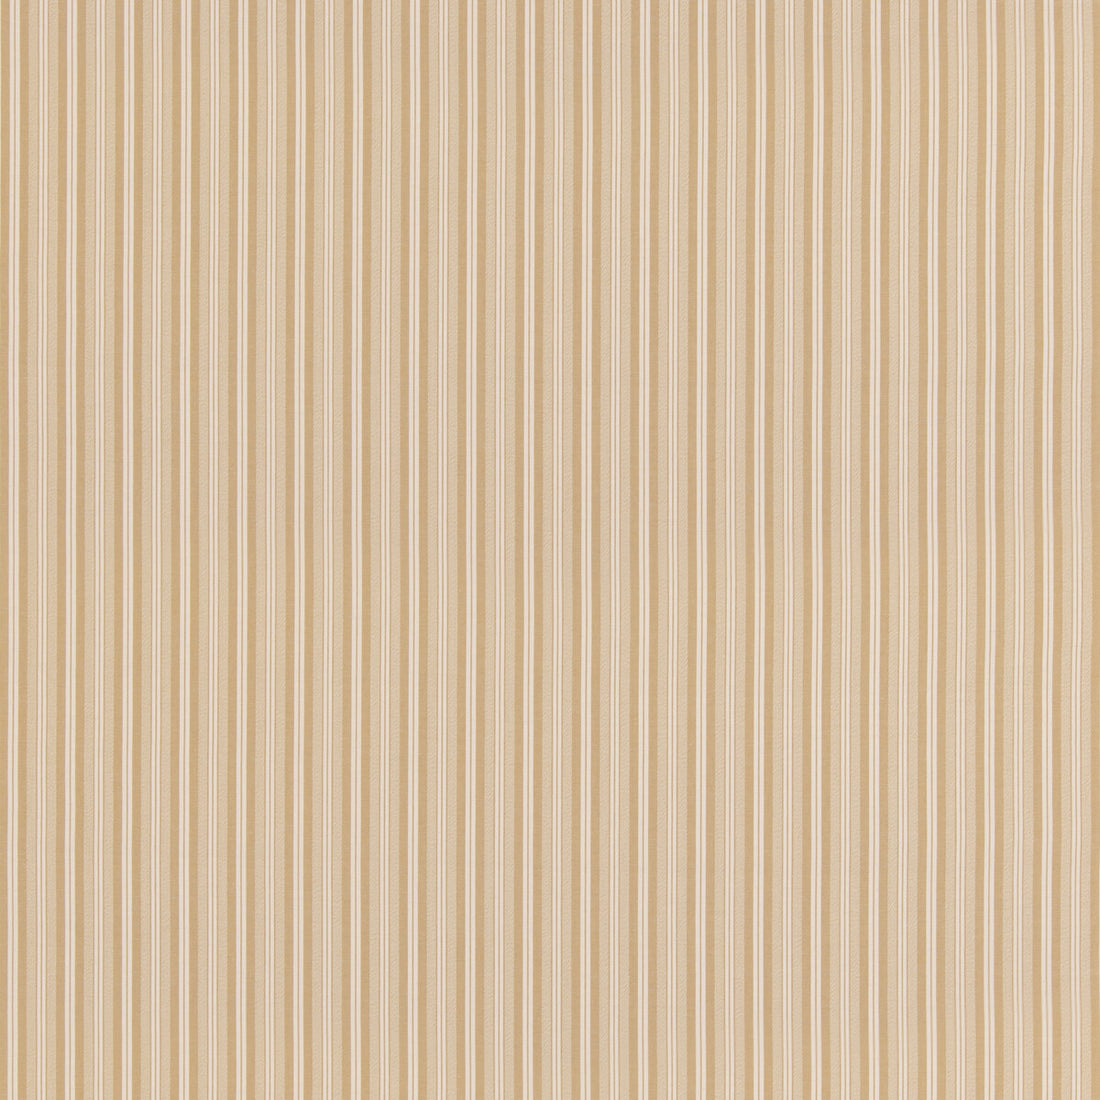 Laverton Stripe fabric in ochre color - pattern BF11037.840.0 - by G P &amp; J Baker in the Baker House Plain &amp; Stripe II collection